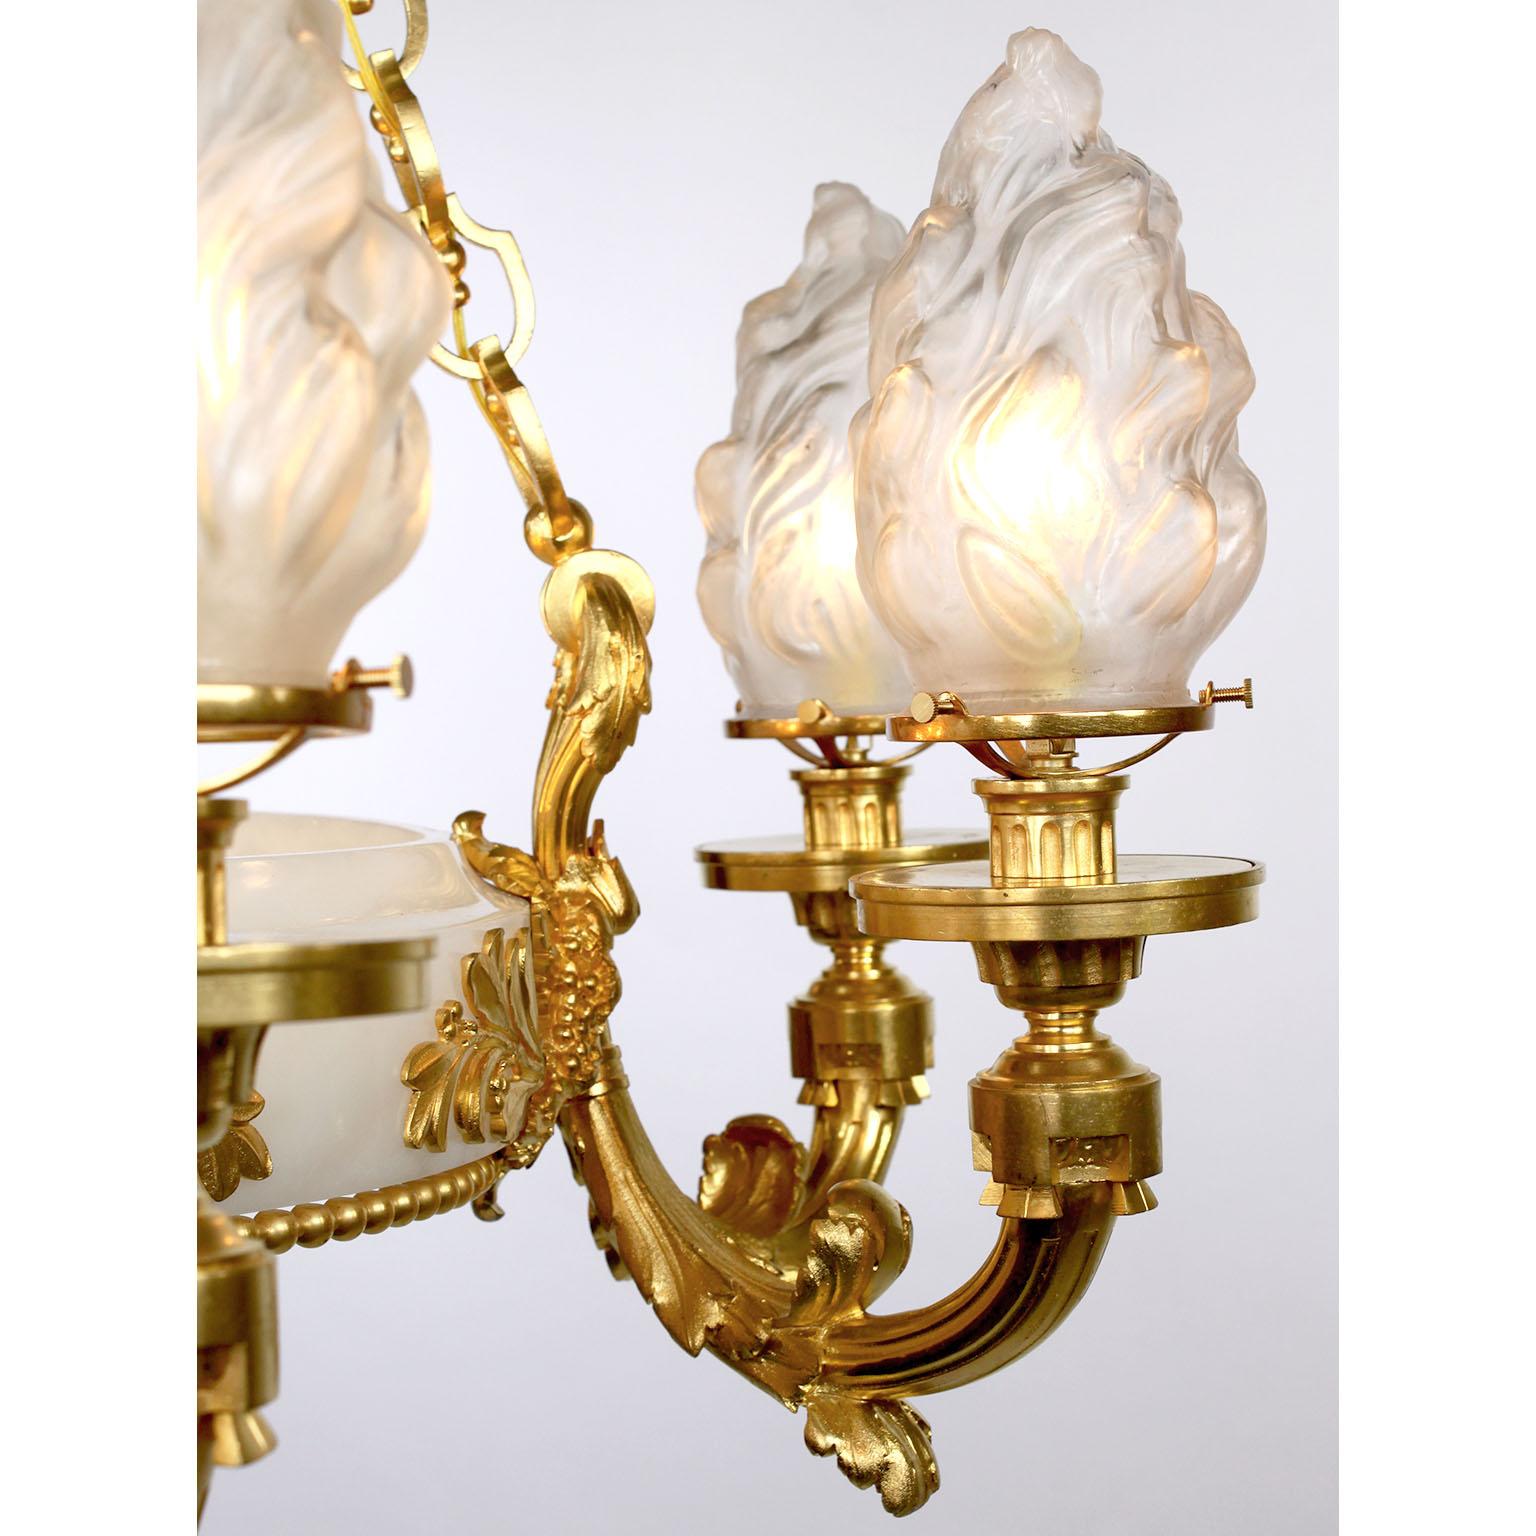 Bronze 19th Century Franco-Russian Neoclassical Style Ormolu & Alabaster Chandelier For Sale